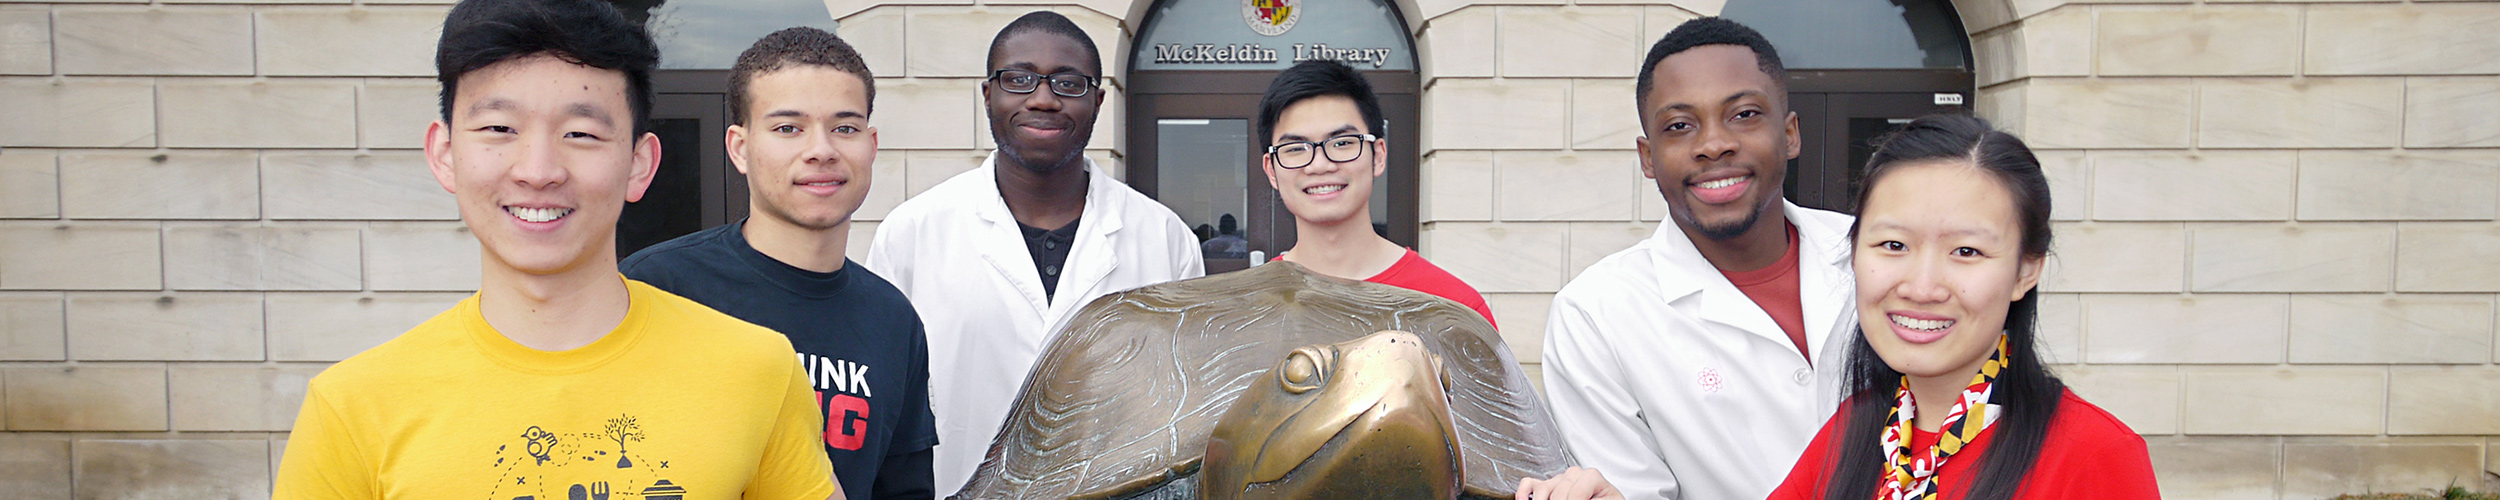 A group of HPAO students outside the library, posing with a bronze statue of Testudo.